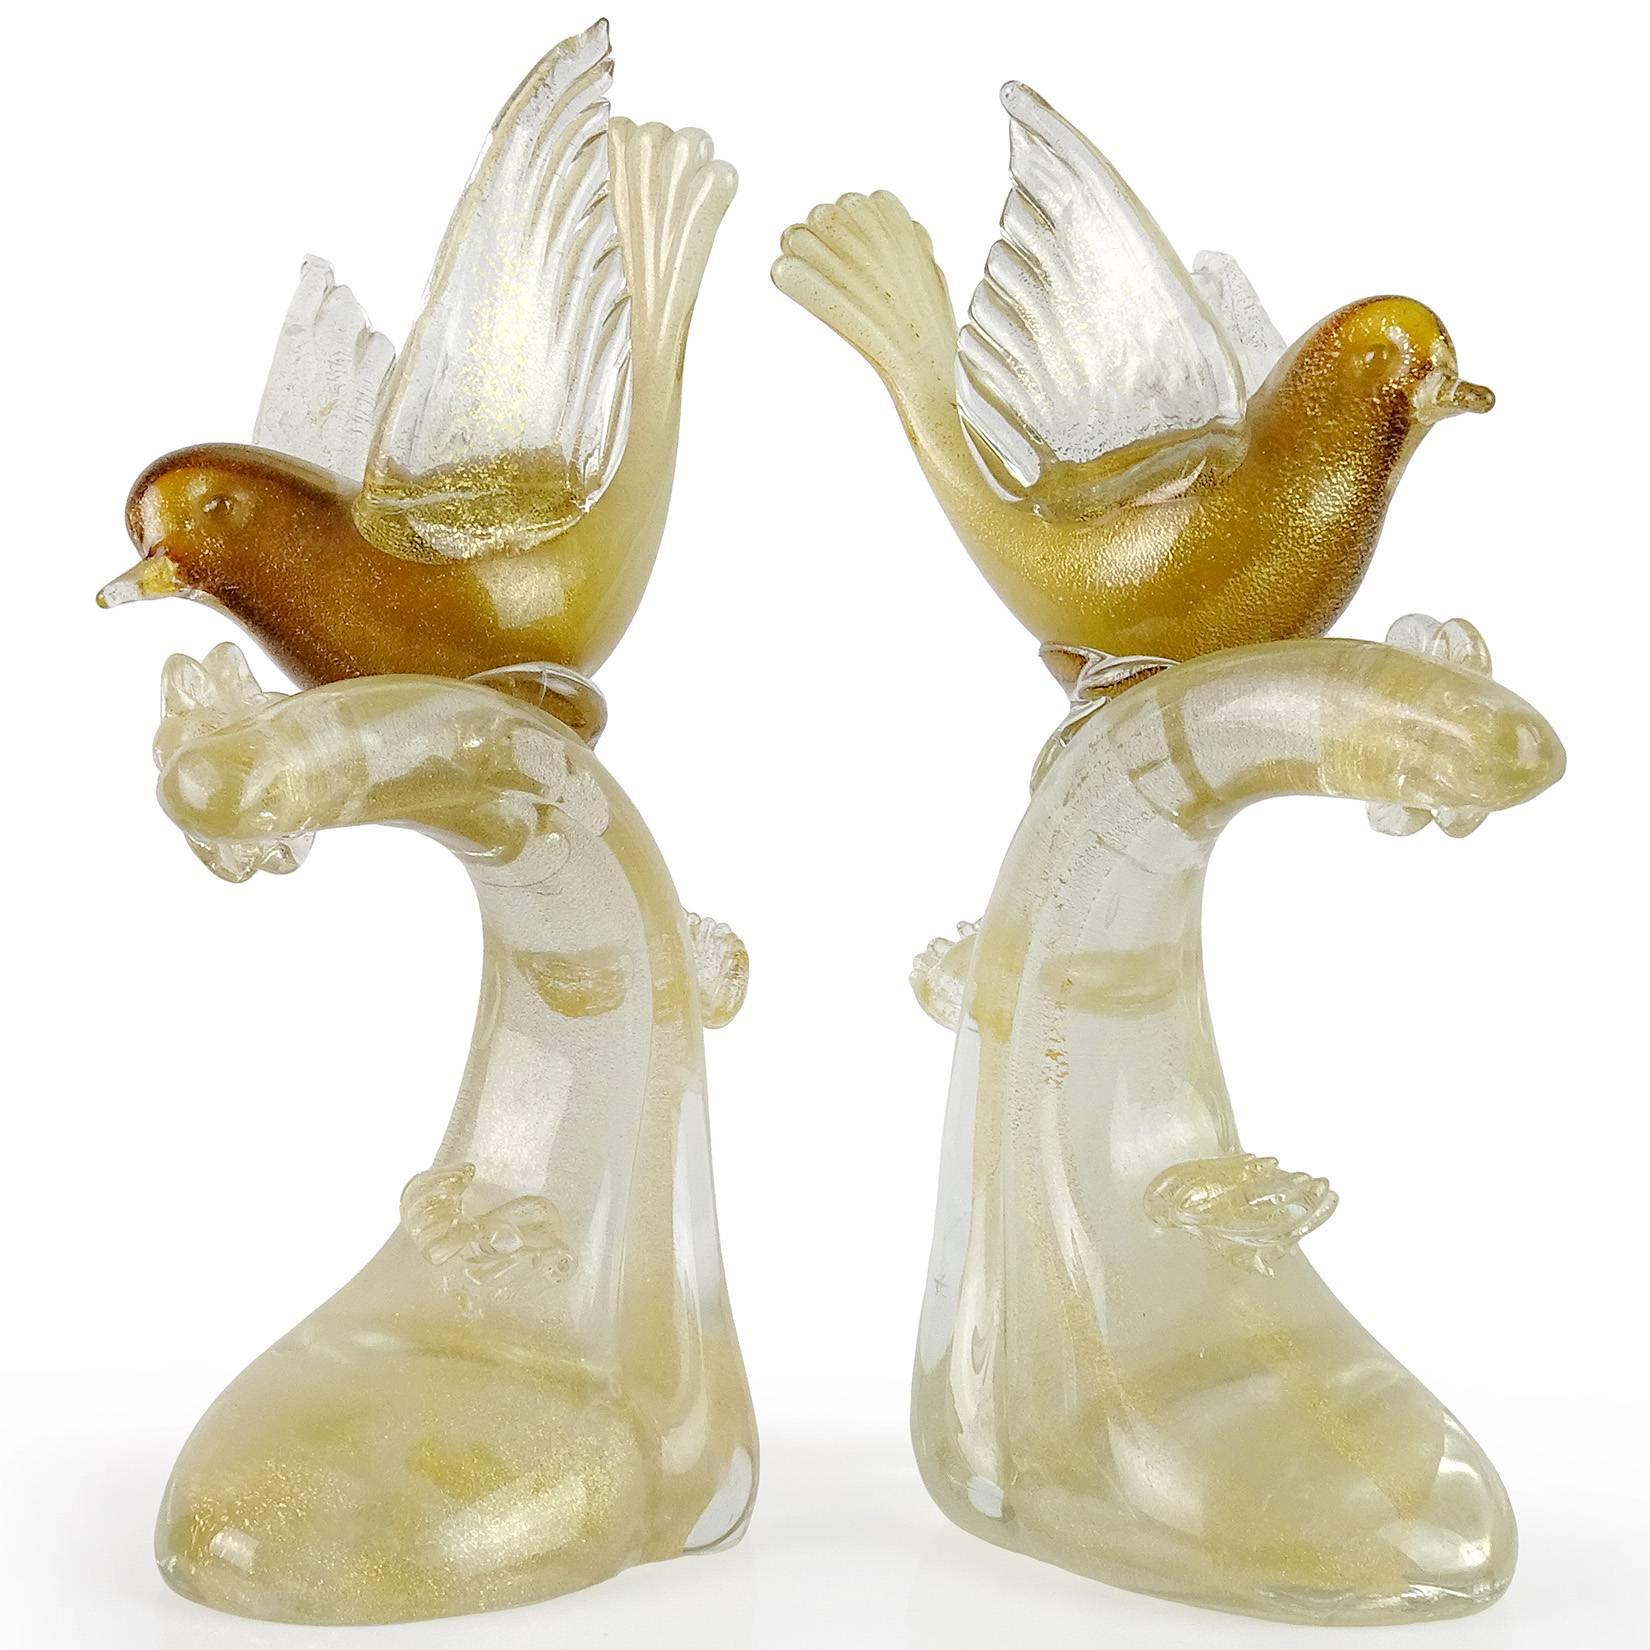 Gorgeous matched pair of vintage Murano hand blown white, dark amber and gold flecks Italian art glass bird on branch sculptures. Documented to the Salviati company, with worn original label underneath. The pieces are profusely covered in gold leaf,